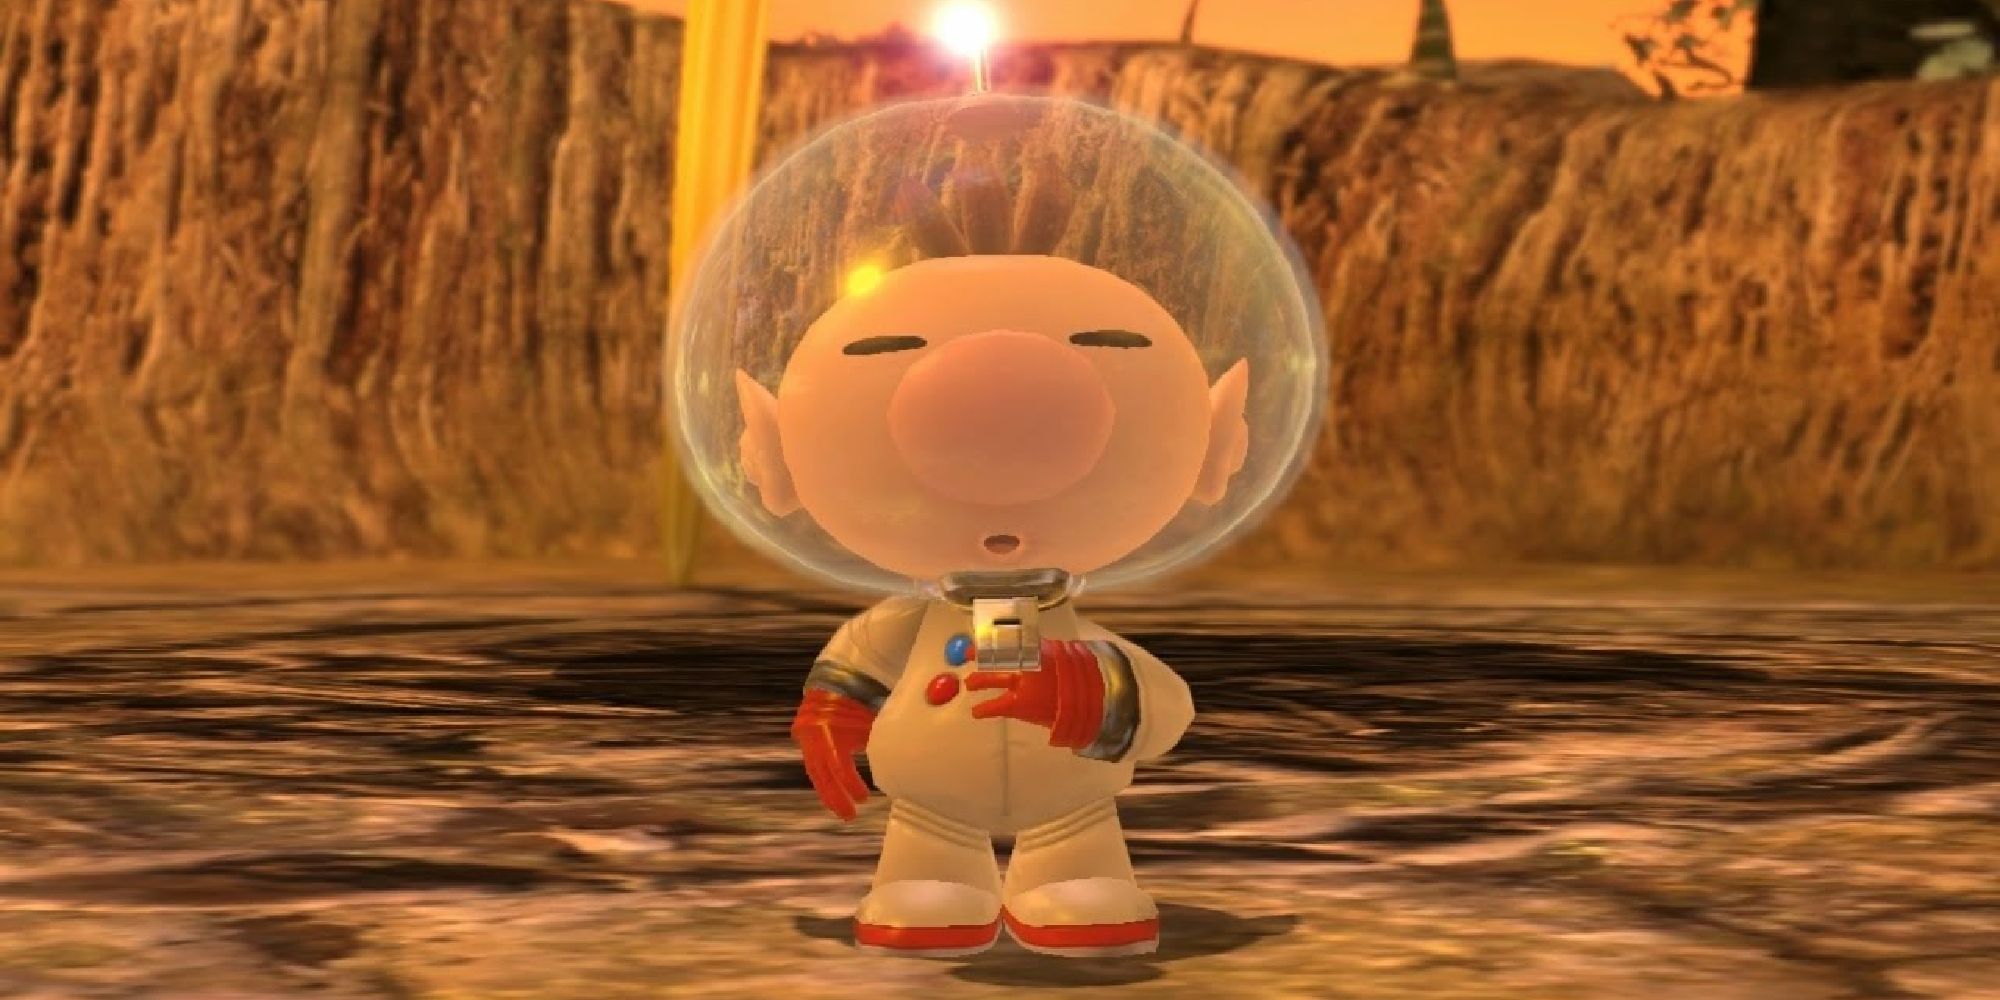 Olimar appearing at the end of Pikmin 3